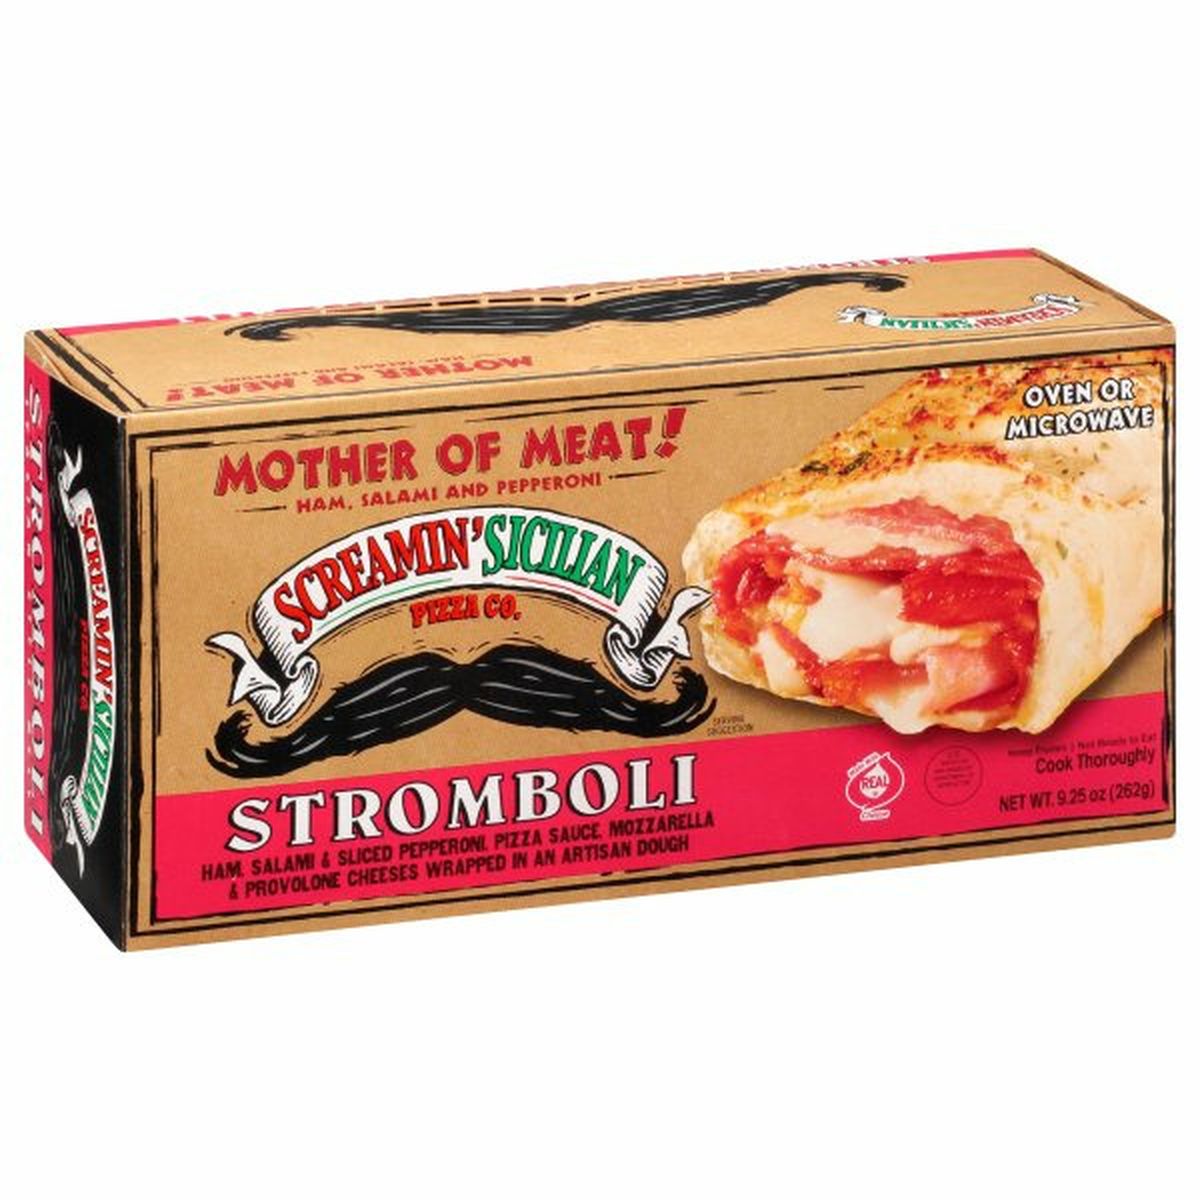 Calories in Screamin' Sicilian Stromboli, Mother of Meat, Ham, Salami and Pepperoni